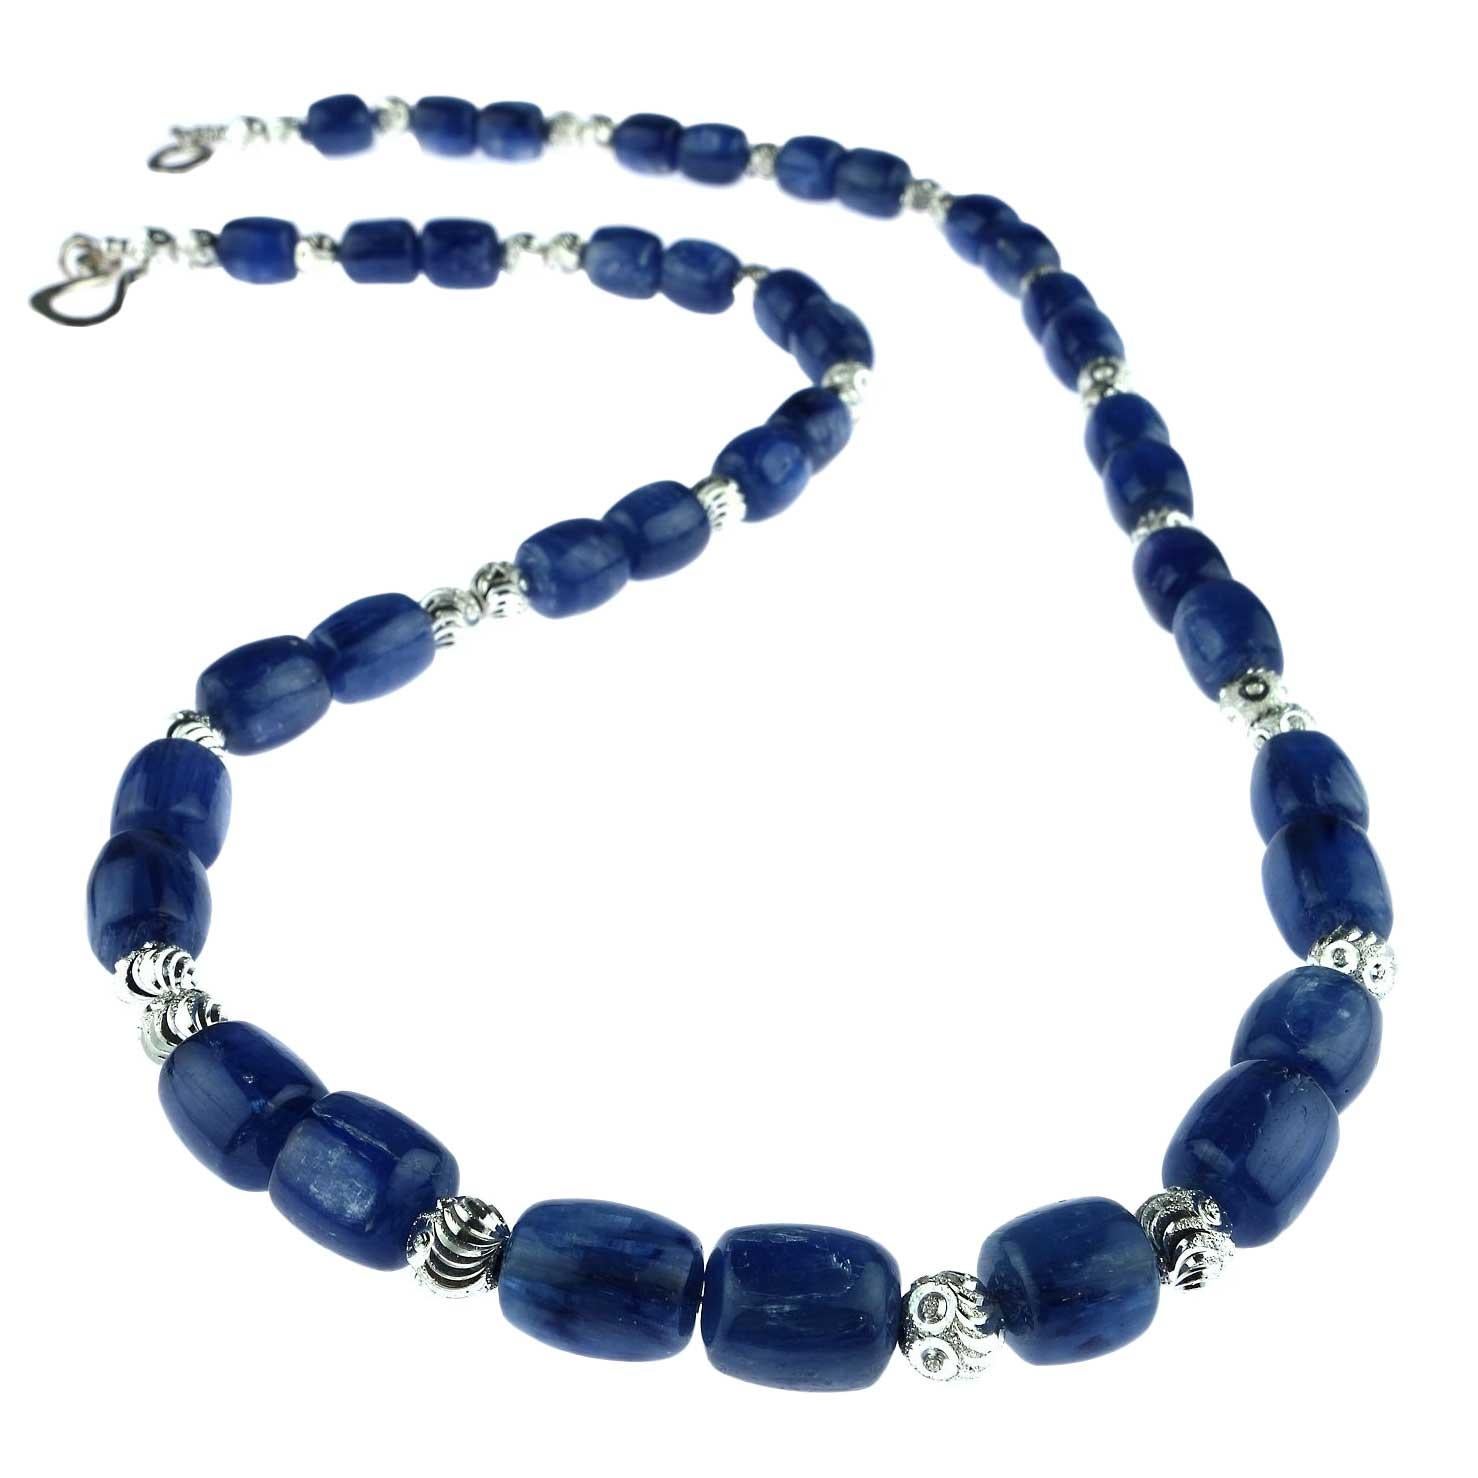 Blue Kyanite and Silver Necklace